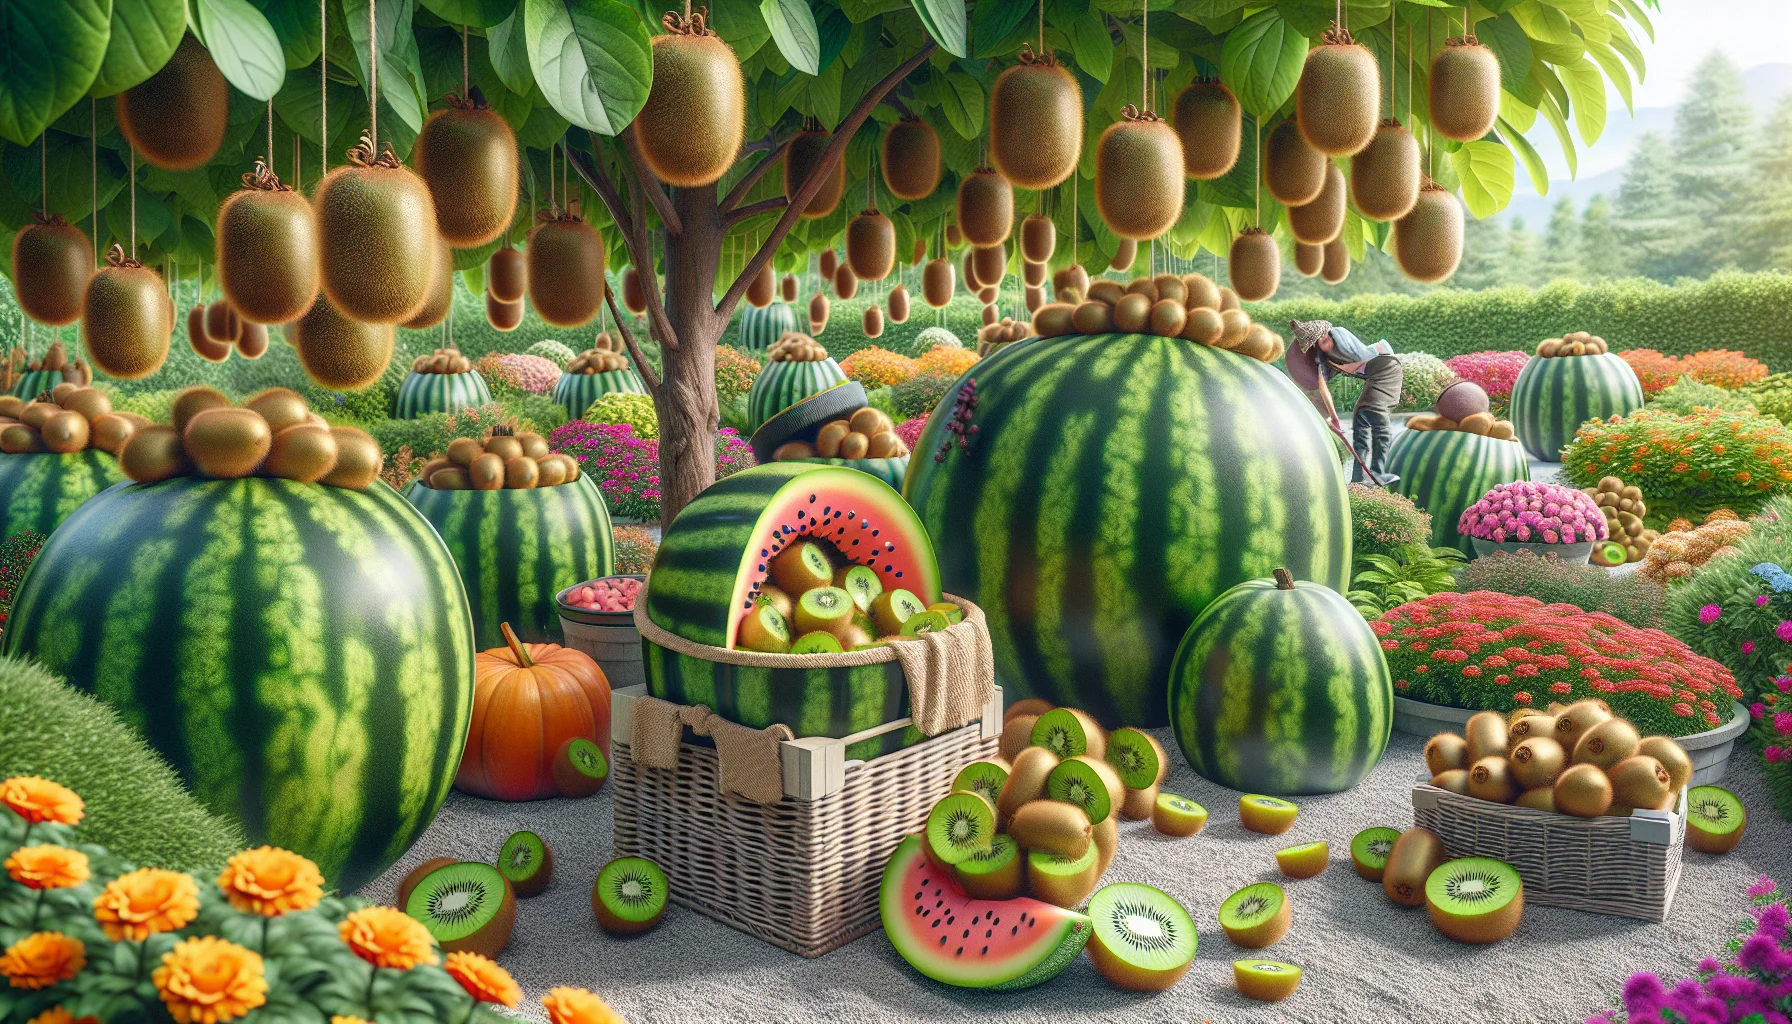 Create a realistic and amusing image that showcases a wide variety of kiwi fruits being stored in quirky ways. This scene should occur in a beautifully landscaped garden, which should be vibrant, inviting and filled with various types of plants and flowers. Within the garden, present kiwi being stored in an unconventional manner such as inside larger fruits like watermelons or pumpkins and hanging from the trees with strings. This image should communicate the concept of achieving joy through gardening, while also enticing individuals to experience the pleasure of growing and storing kiwi fruits.